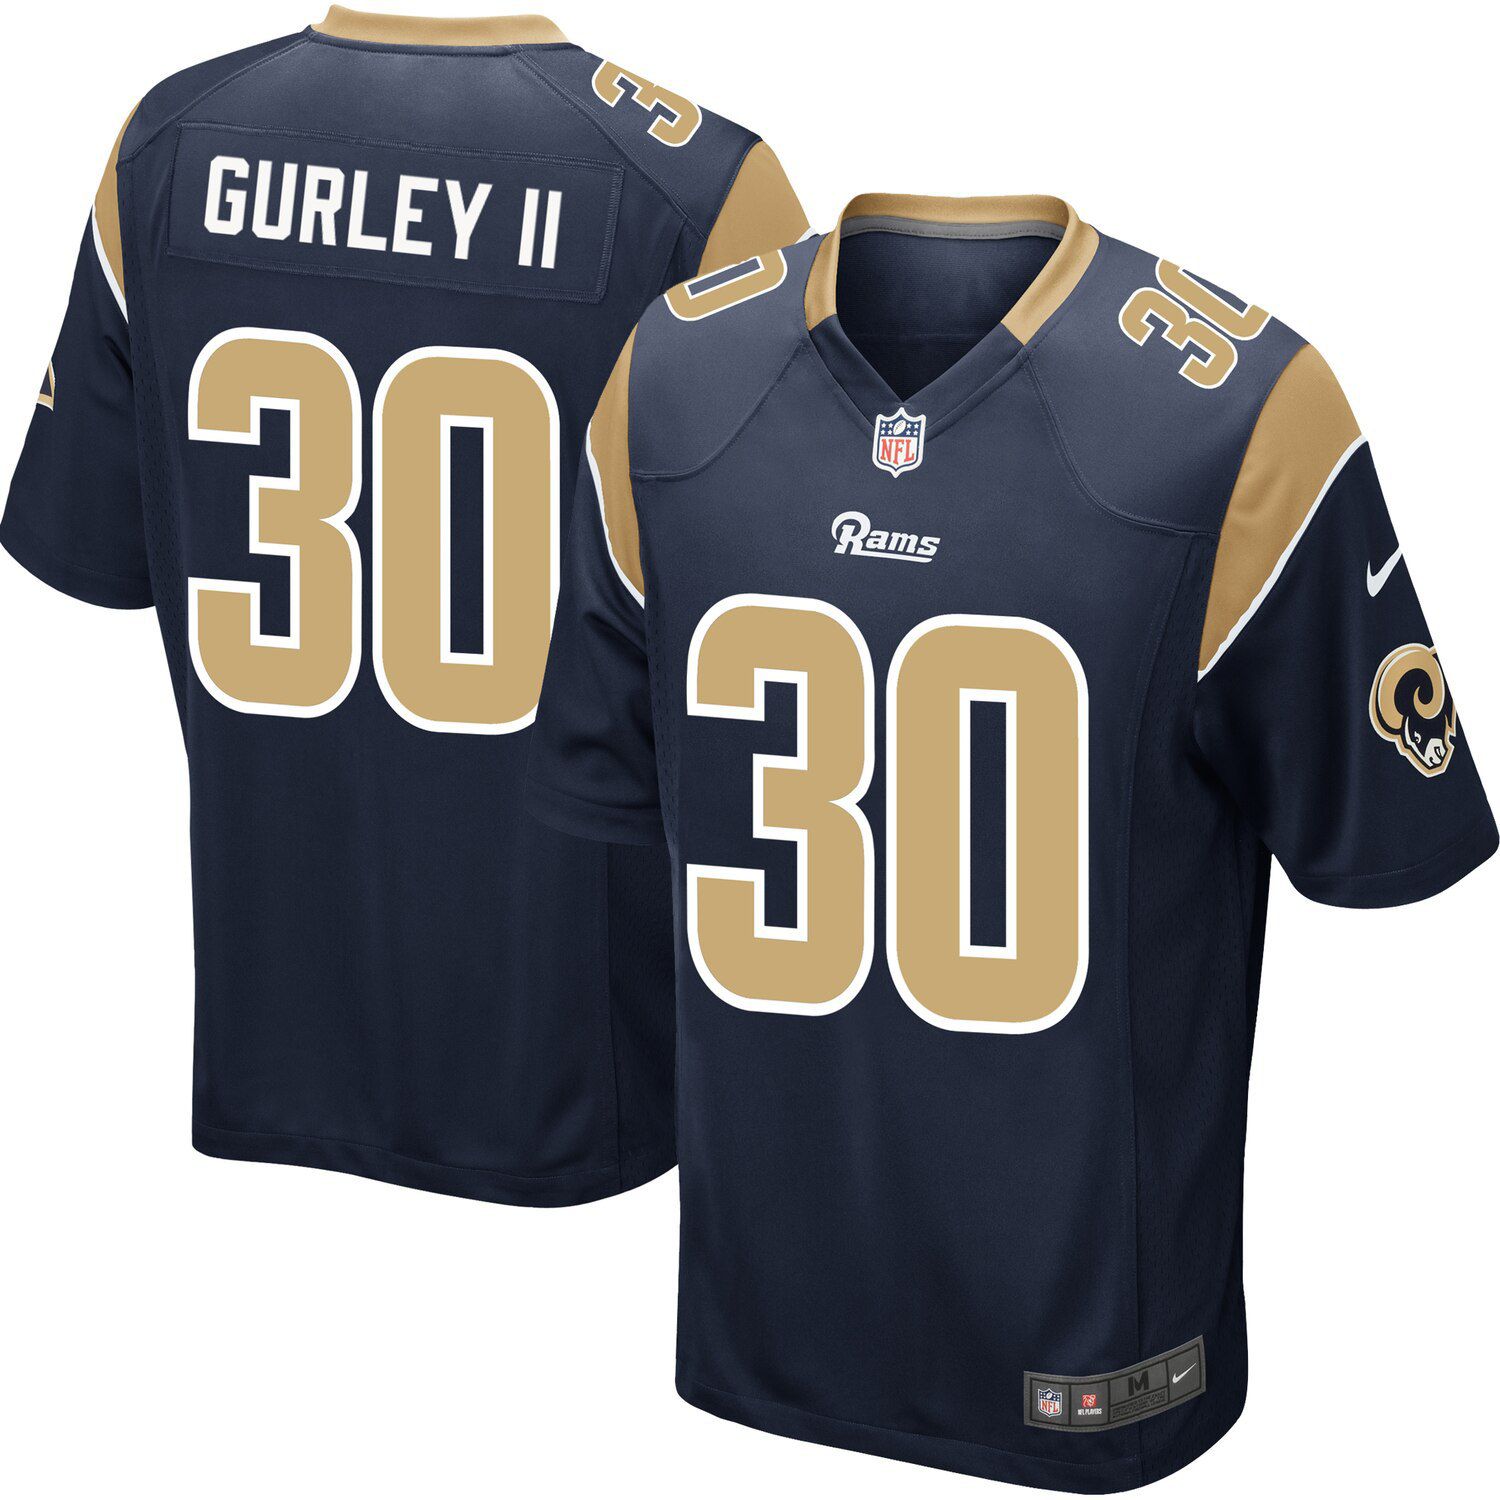 gurley youth jersey